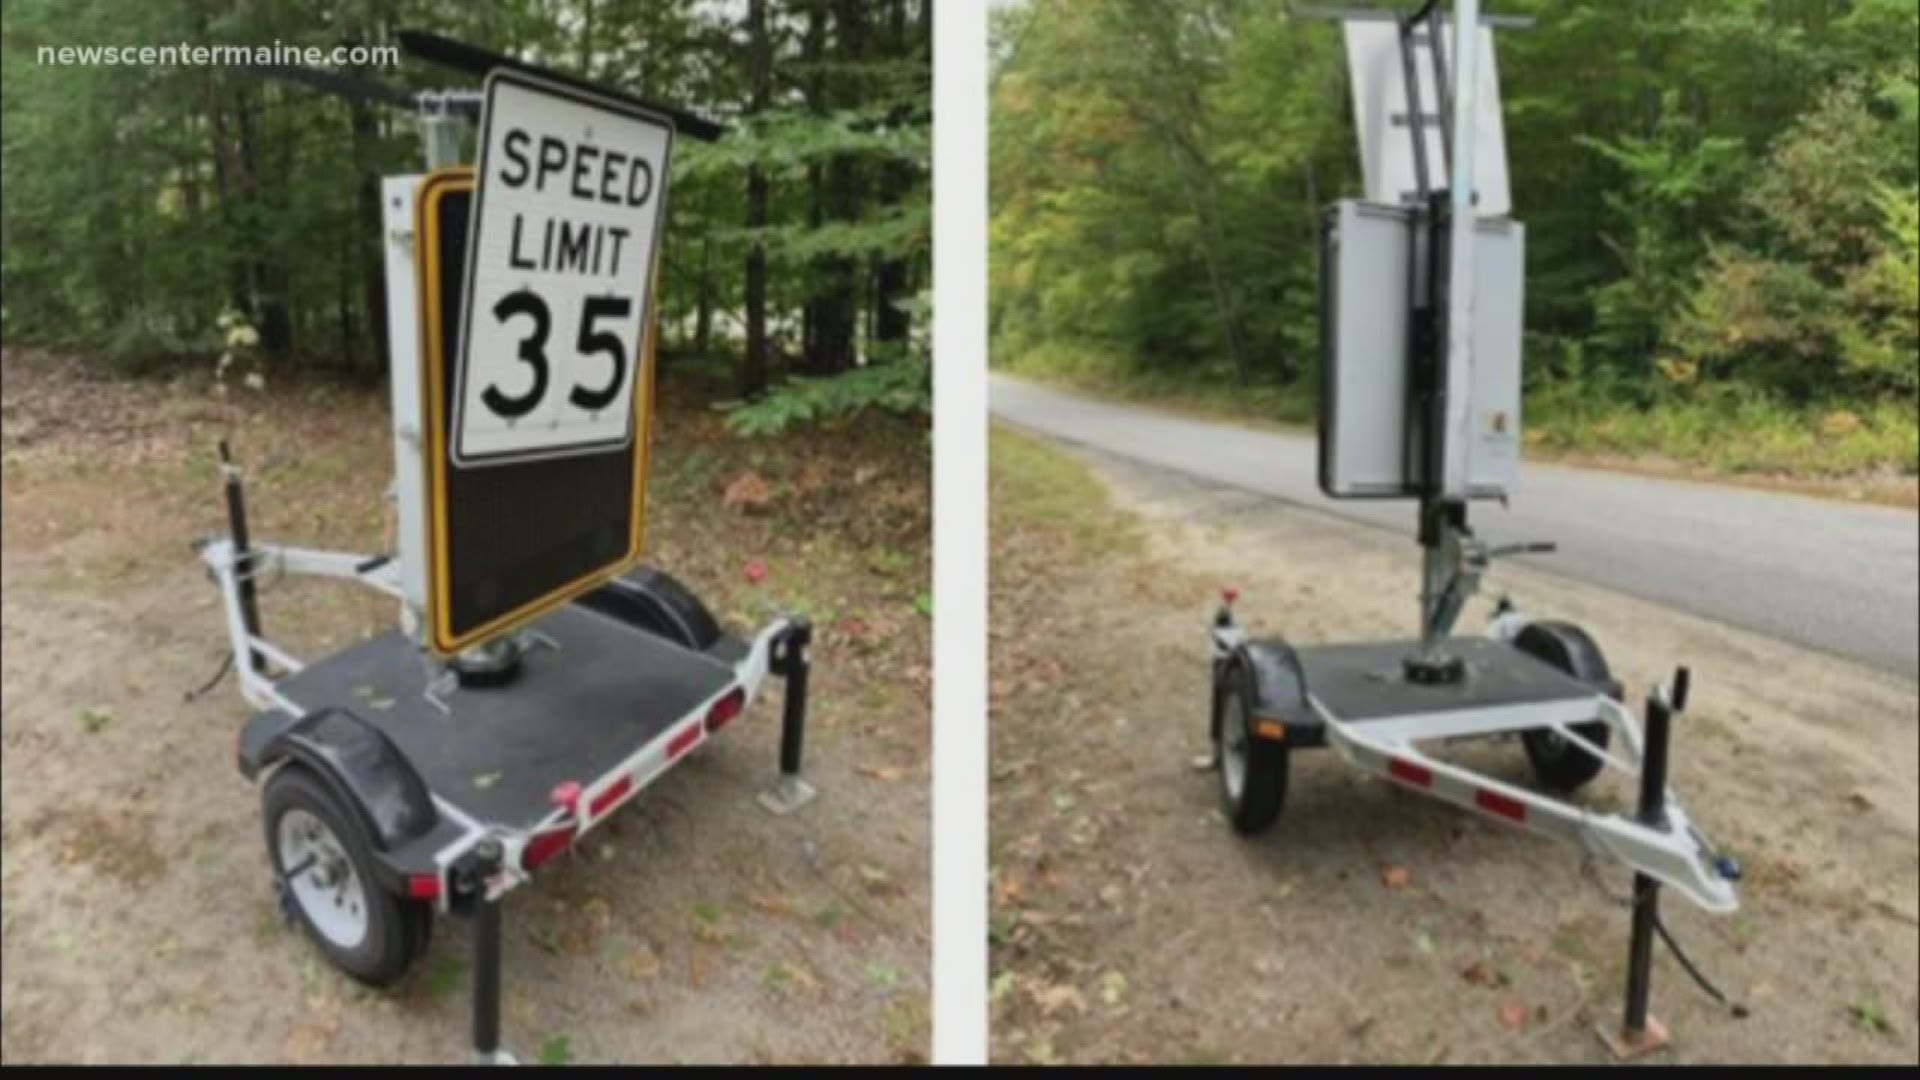 Sabattus police are asking for the public's help in finding whoever stole the solar panel and batteries from a speed trailer.